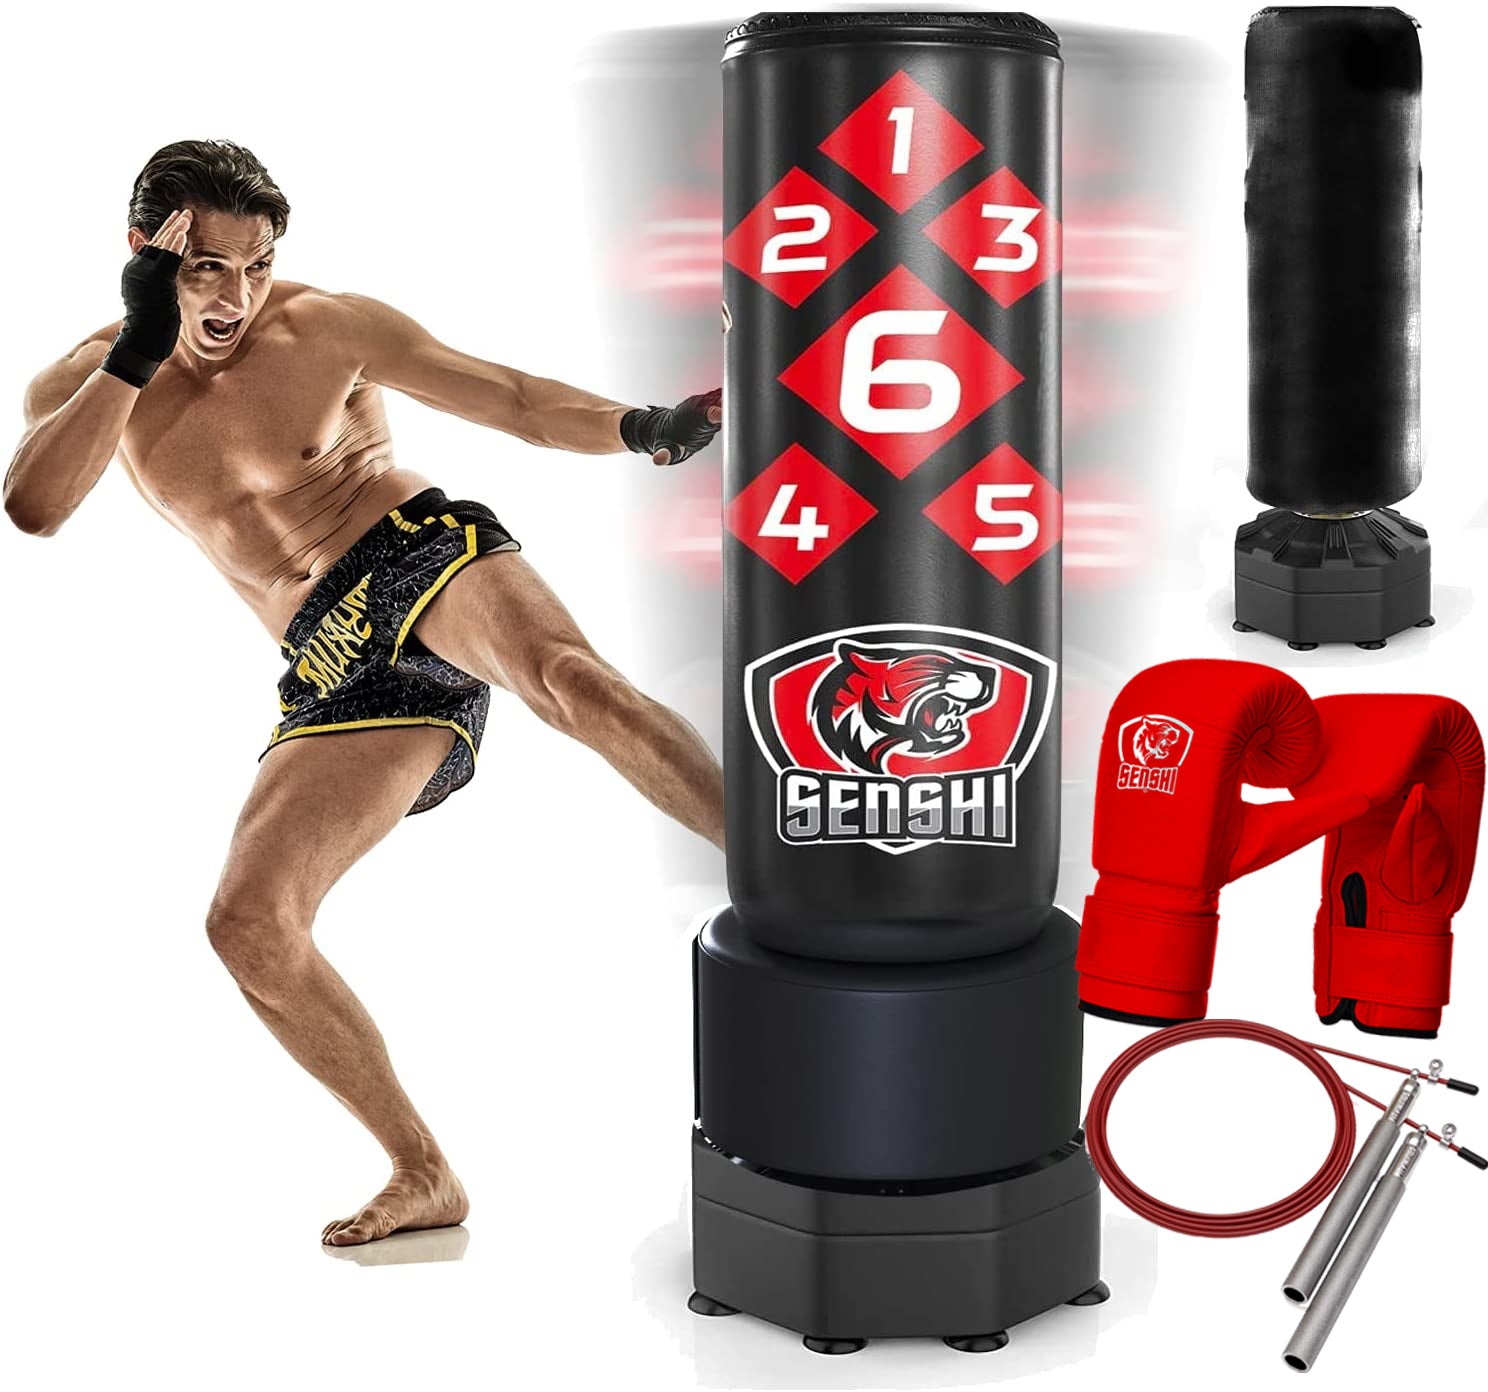 6ft Freestanding Punch Bag With Low Kick Guard And Outdoor Cover